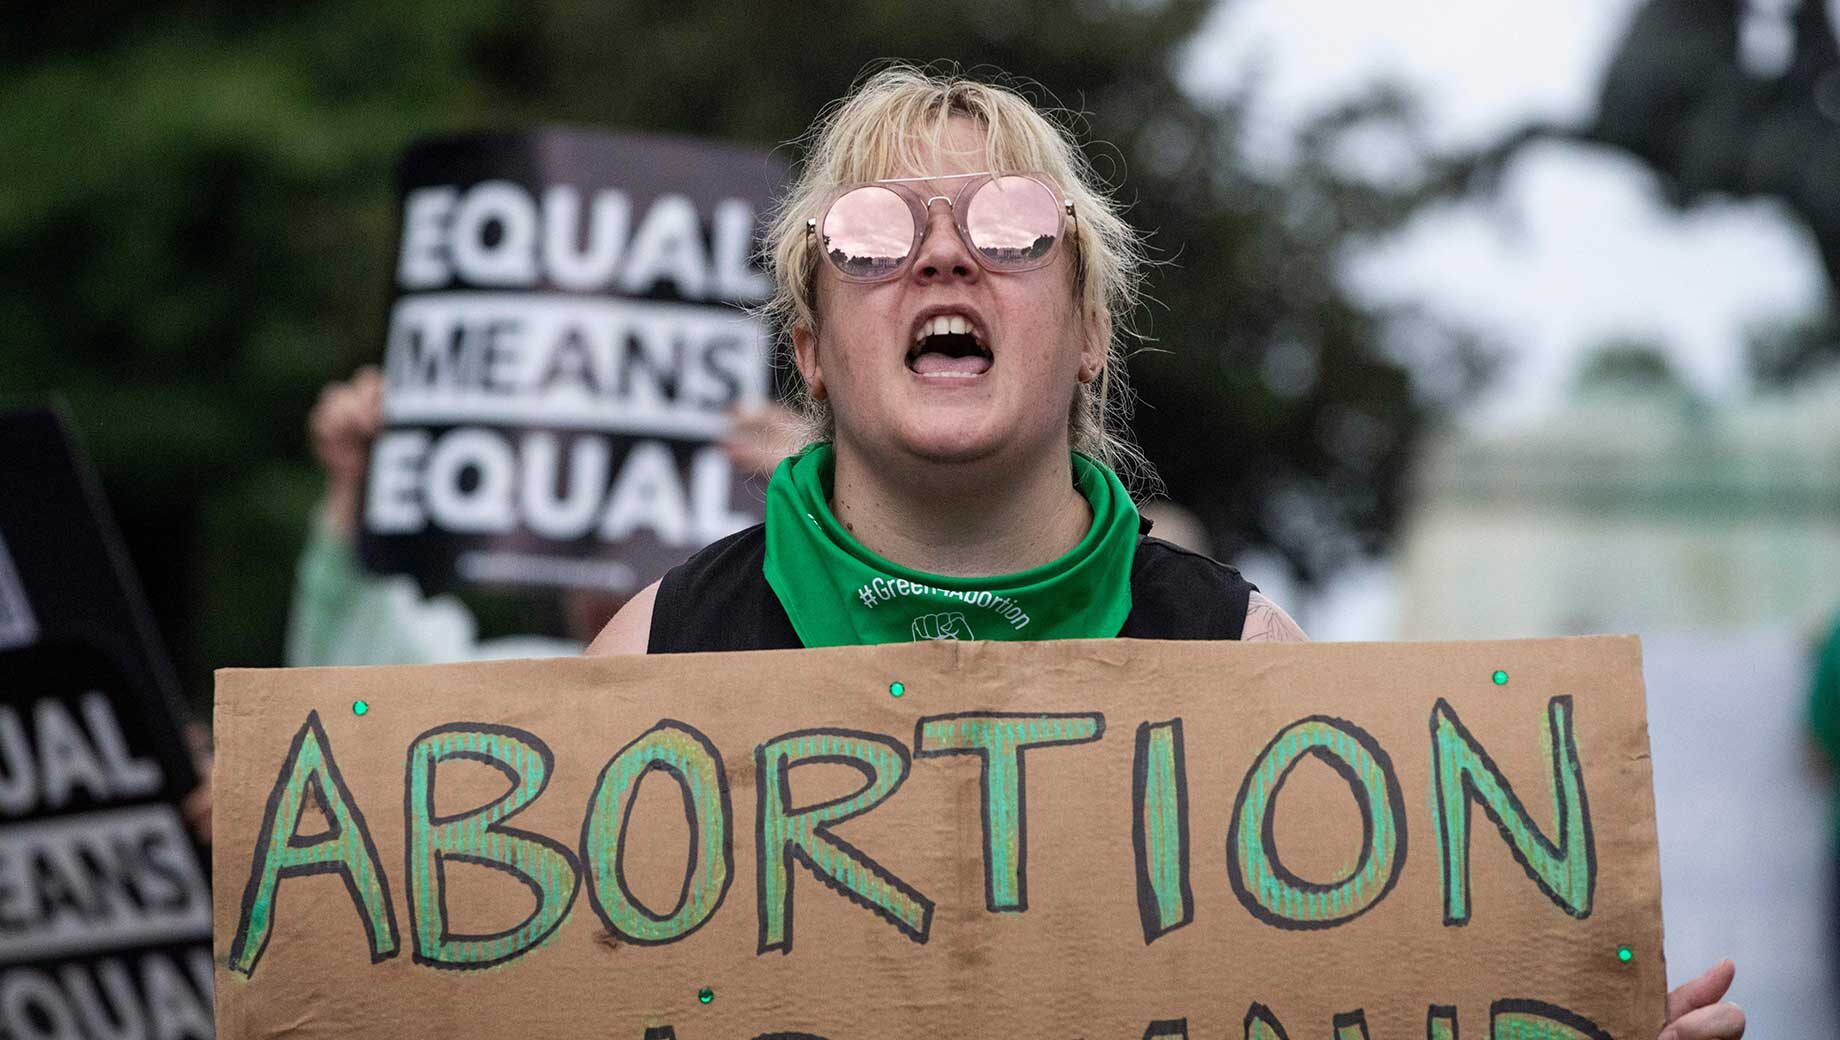 abortion protester